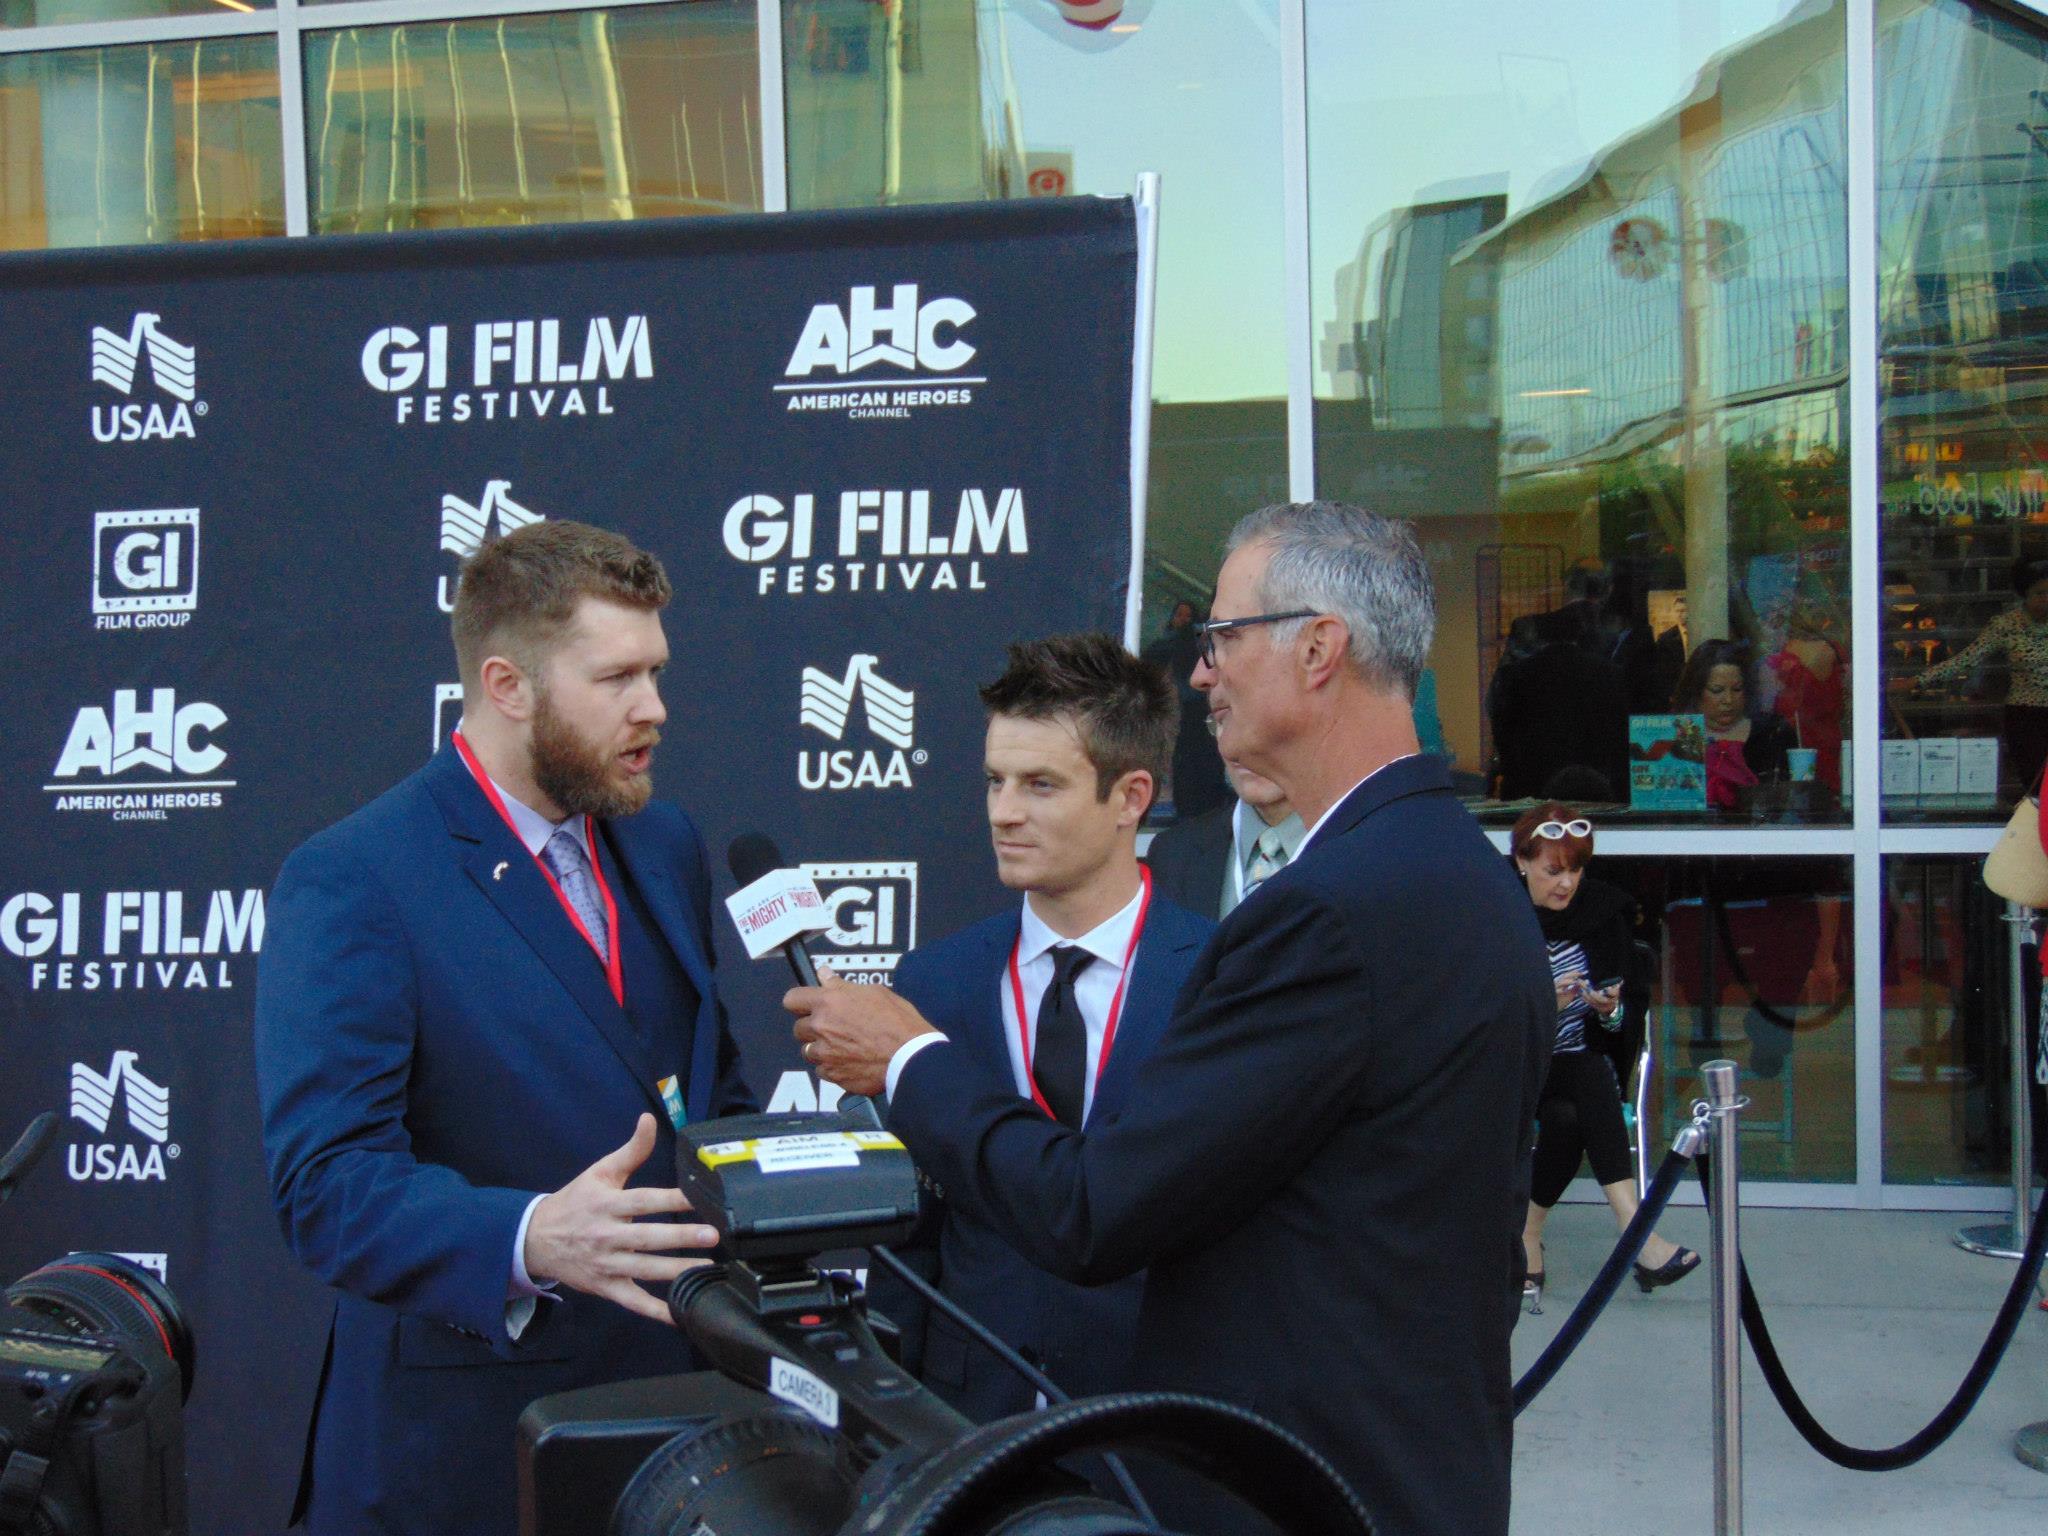 Marty Skovlund Jr. and Director Matthew R. Sanders being interviewed on the red carpet at the 2015 GI Film Festival in Washington, D.C.